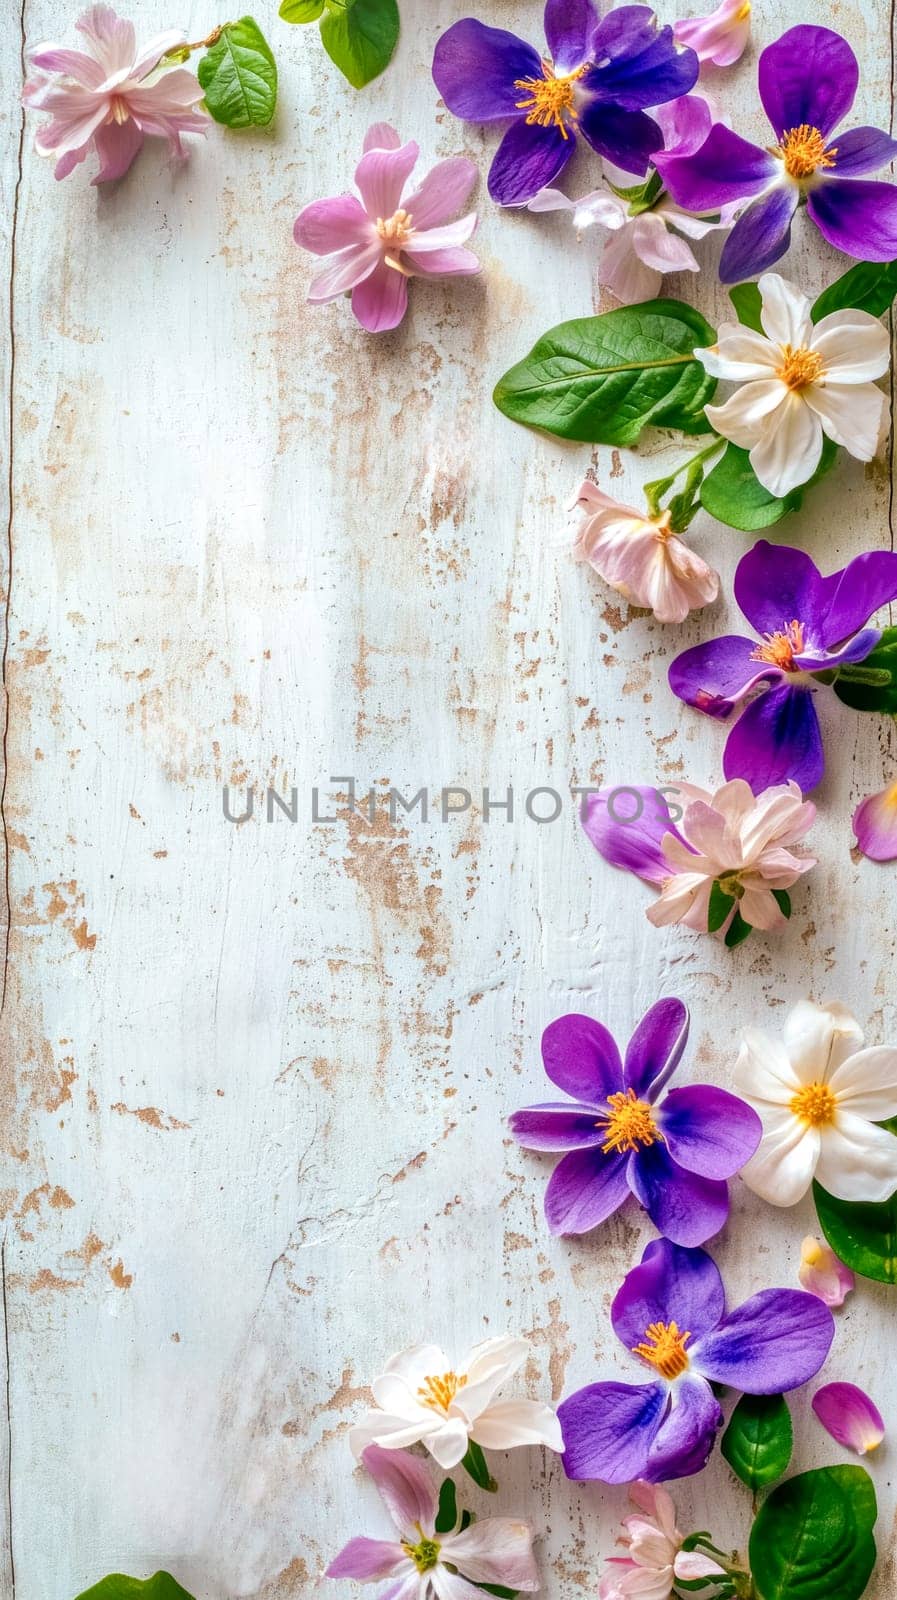 Fresh spring flowers, including delicate purple and white blossoms, are artistically arranged rustic, white-painted wooden background, creating a serene and natural composition. vertical, copy space